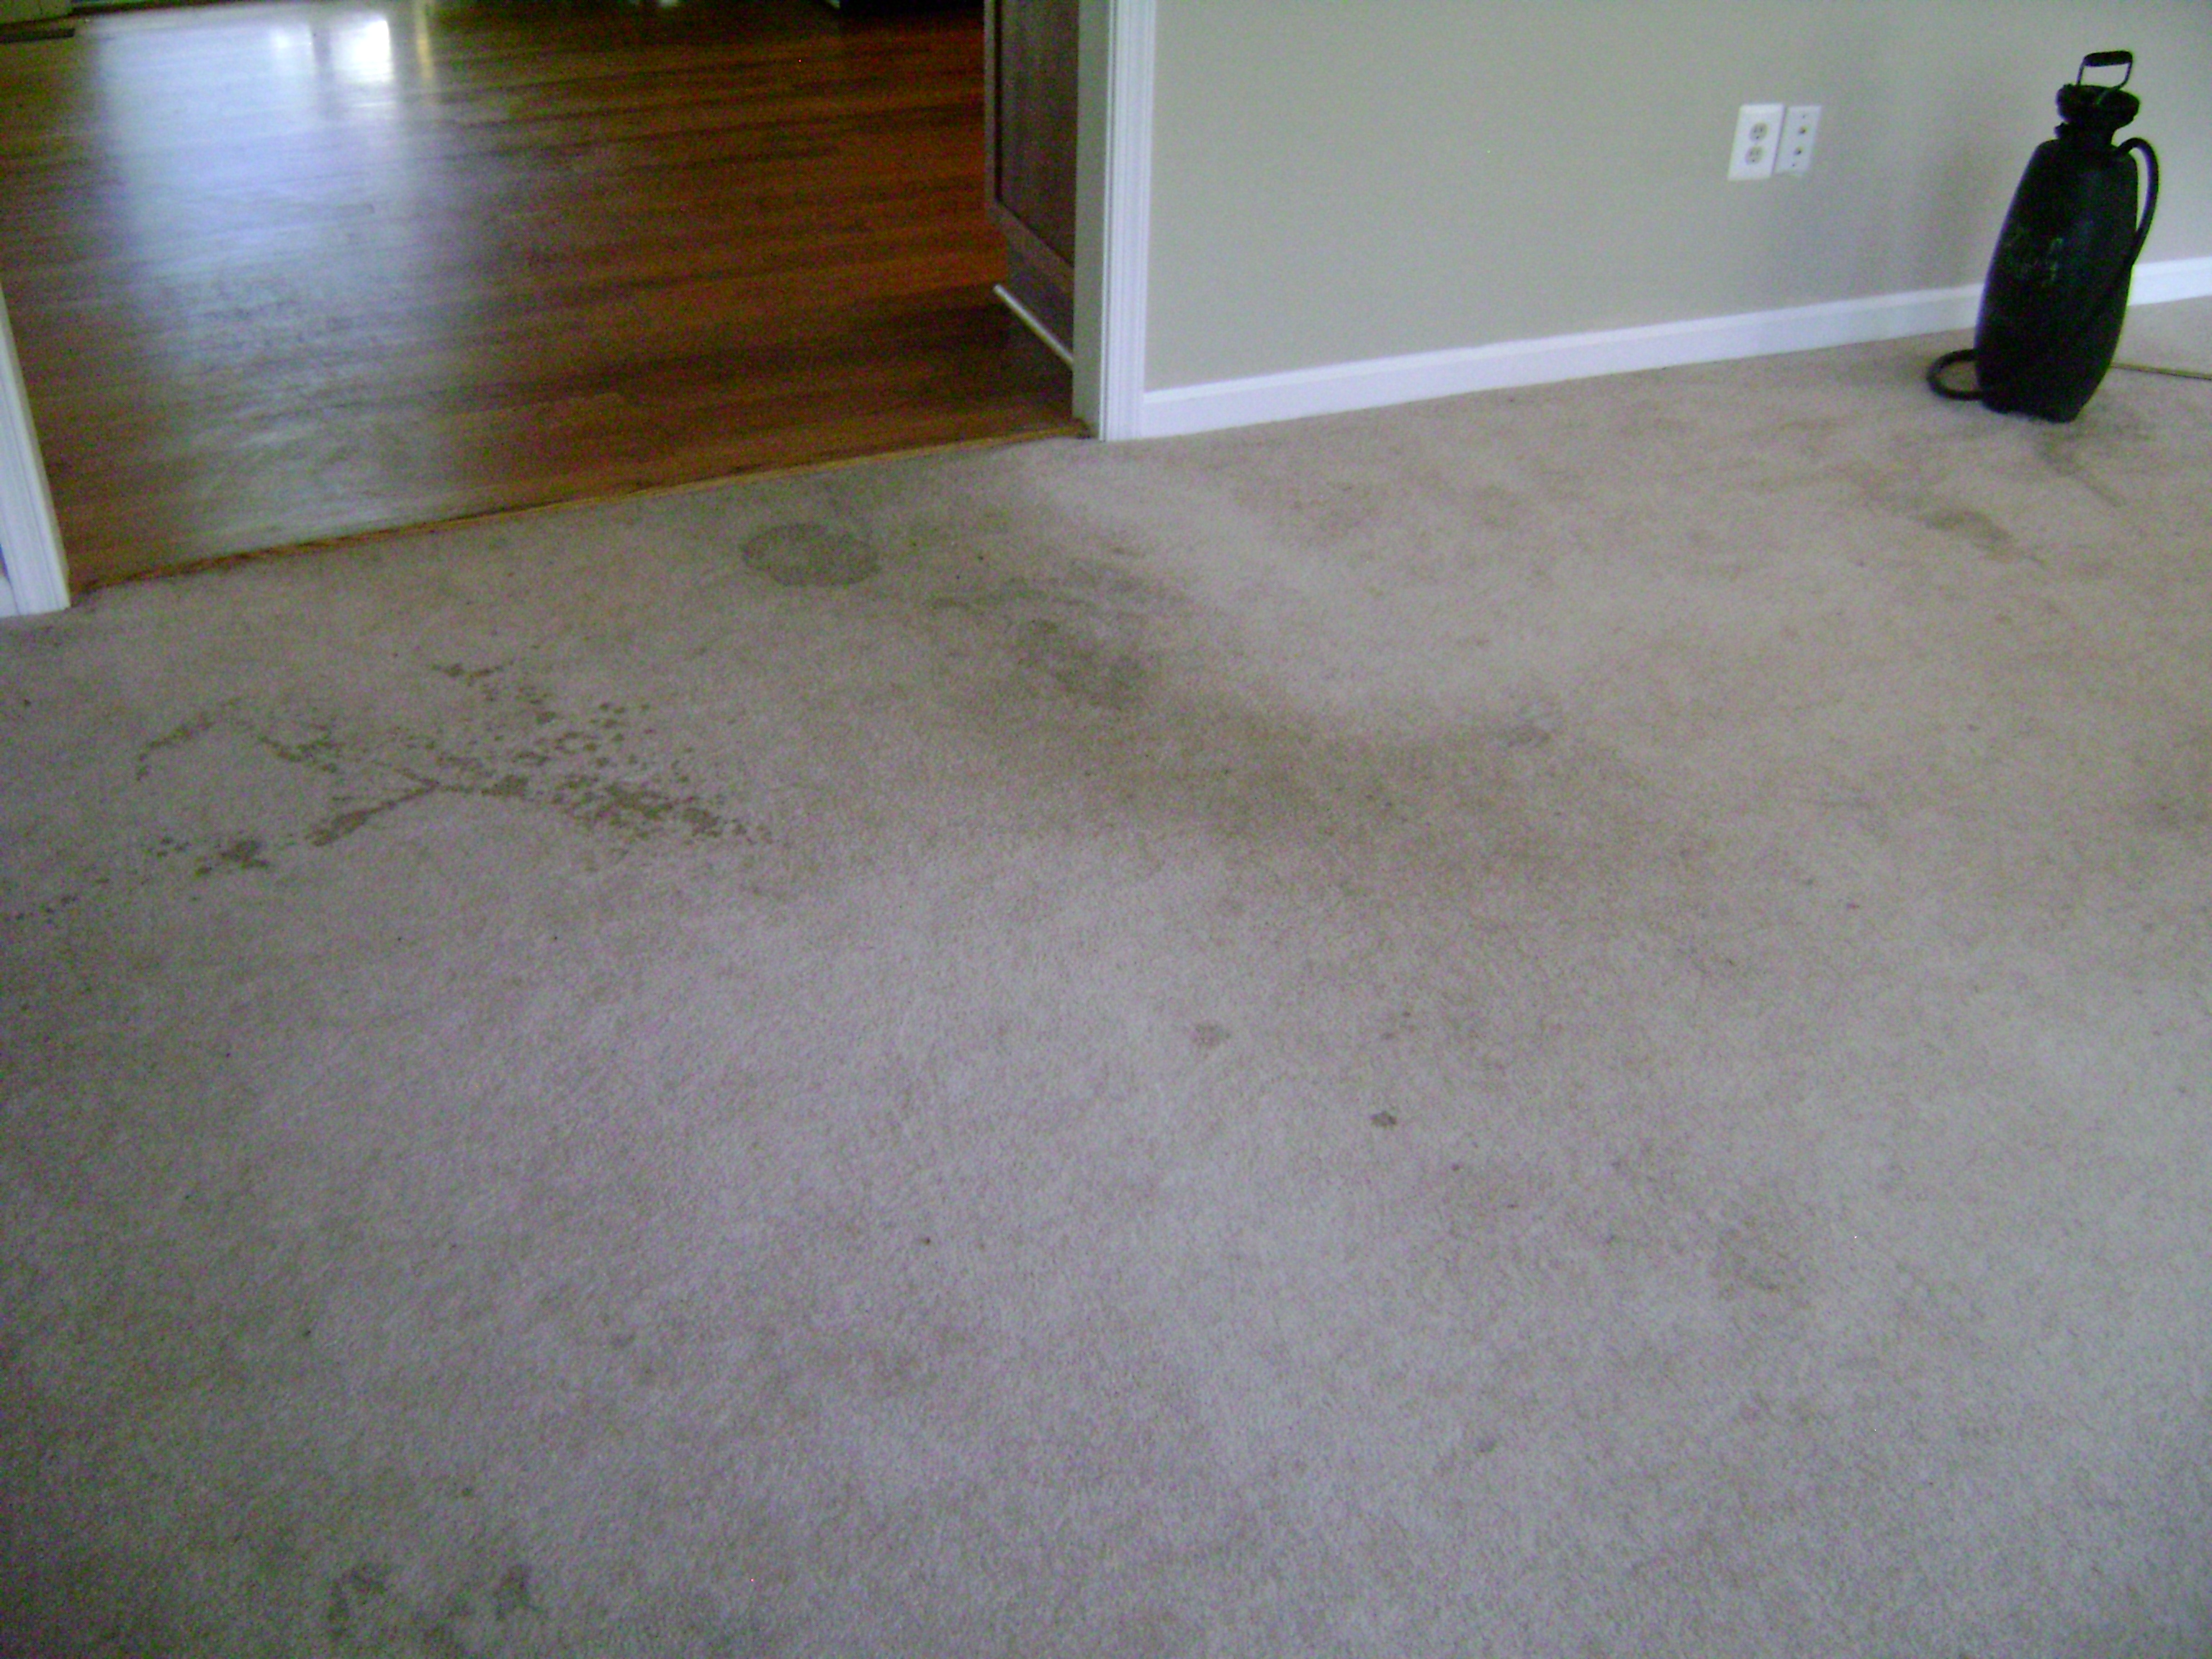 Before A Professional Carpet Cleaning in fairfax va 22033